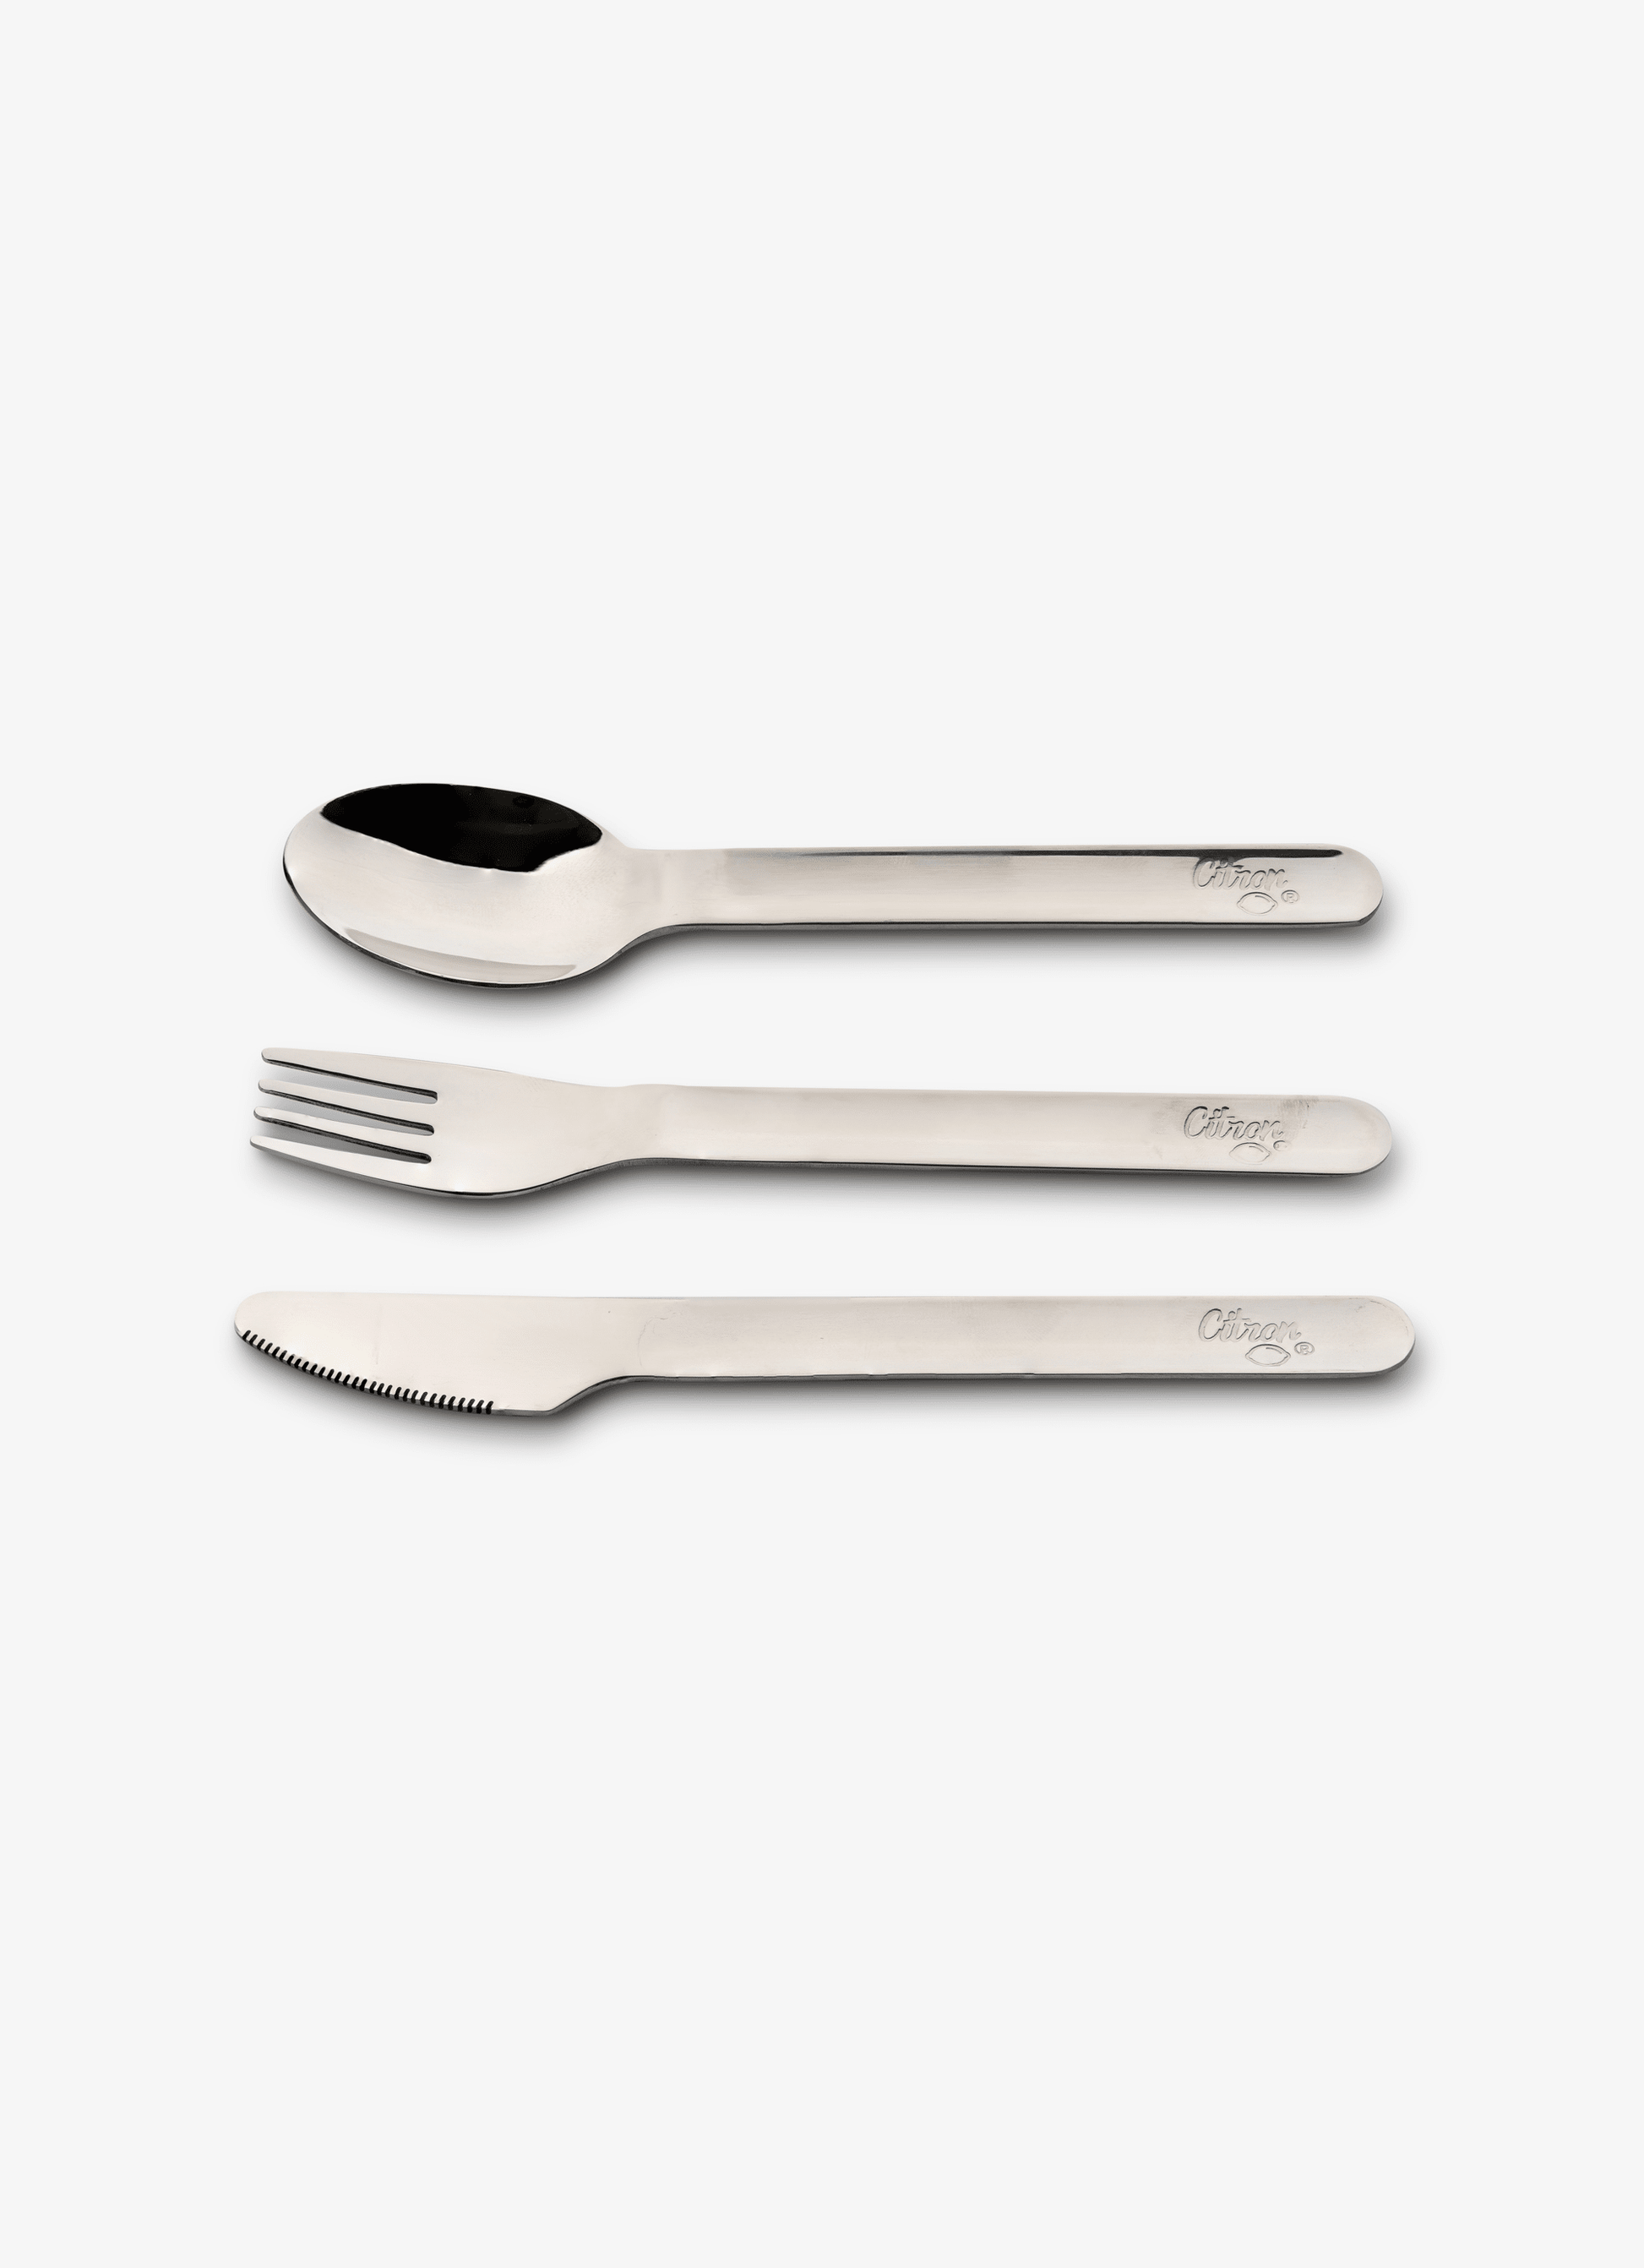 Citron Stainless Steel Cutlery Set with Dusty Blue Case - Laadlee